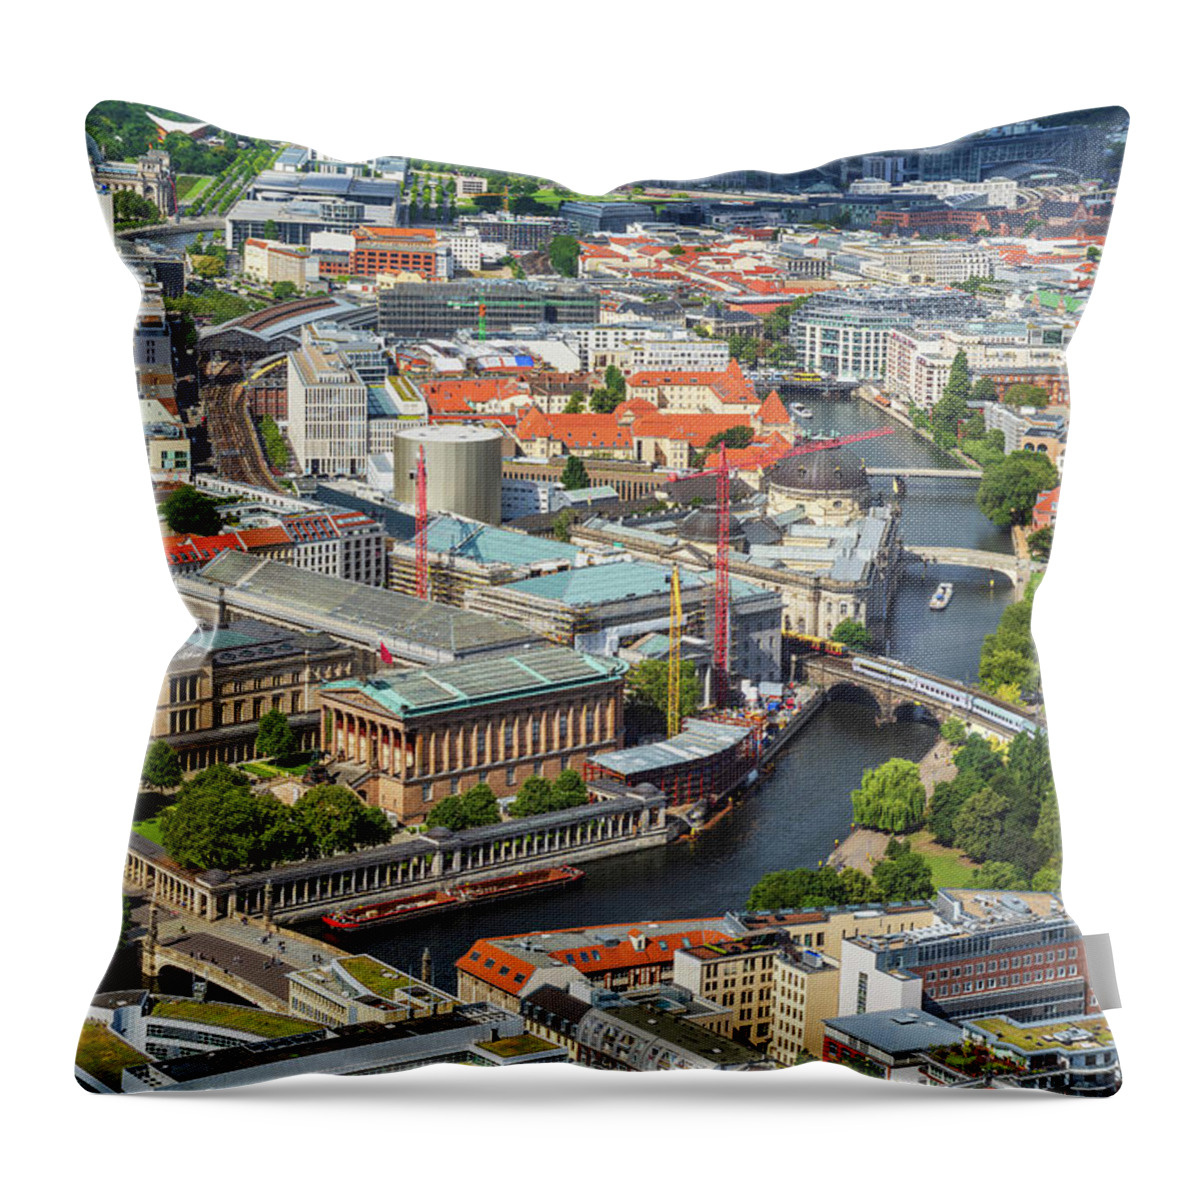 Berlin Throw Pillow featuring the photograph Berlin Cityscape With Museum Island by Artur Bogacki